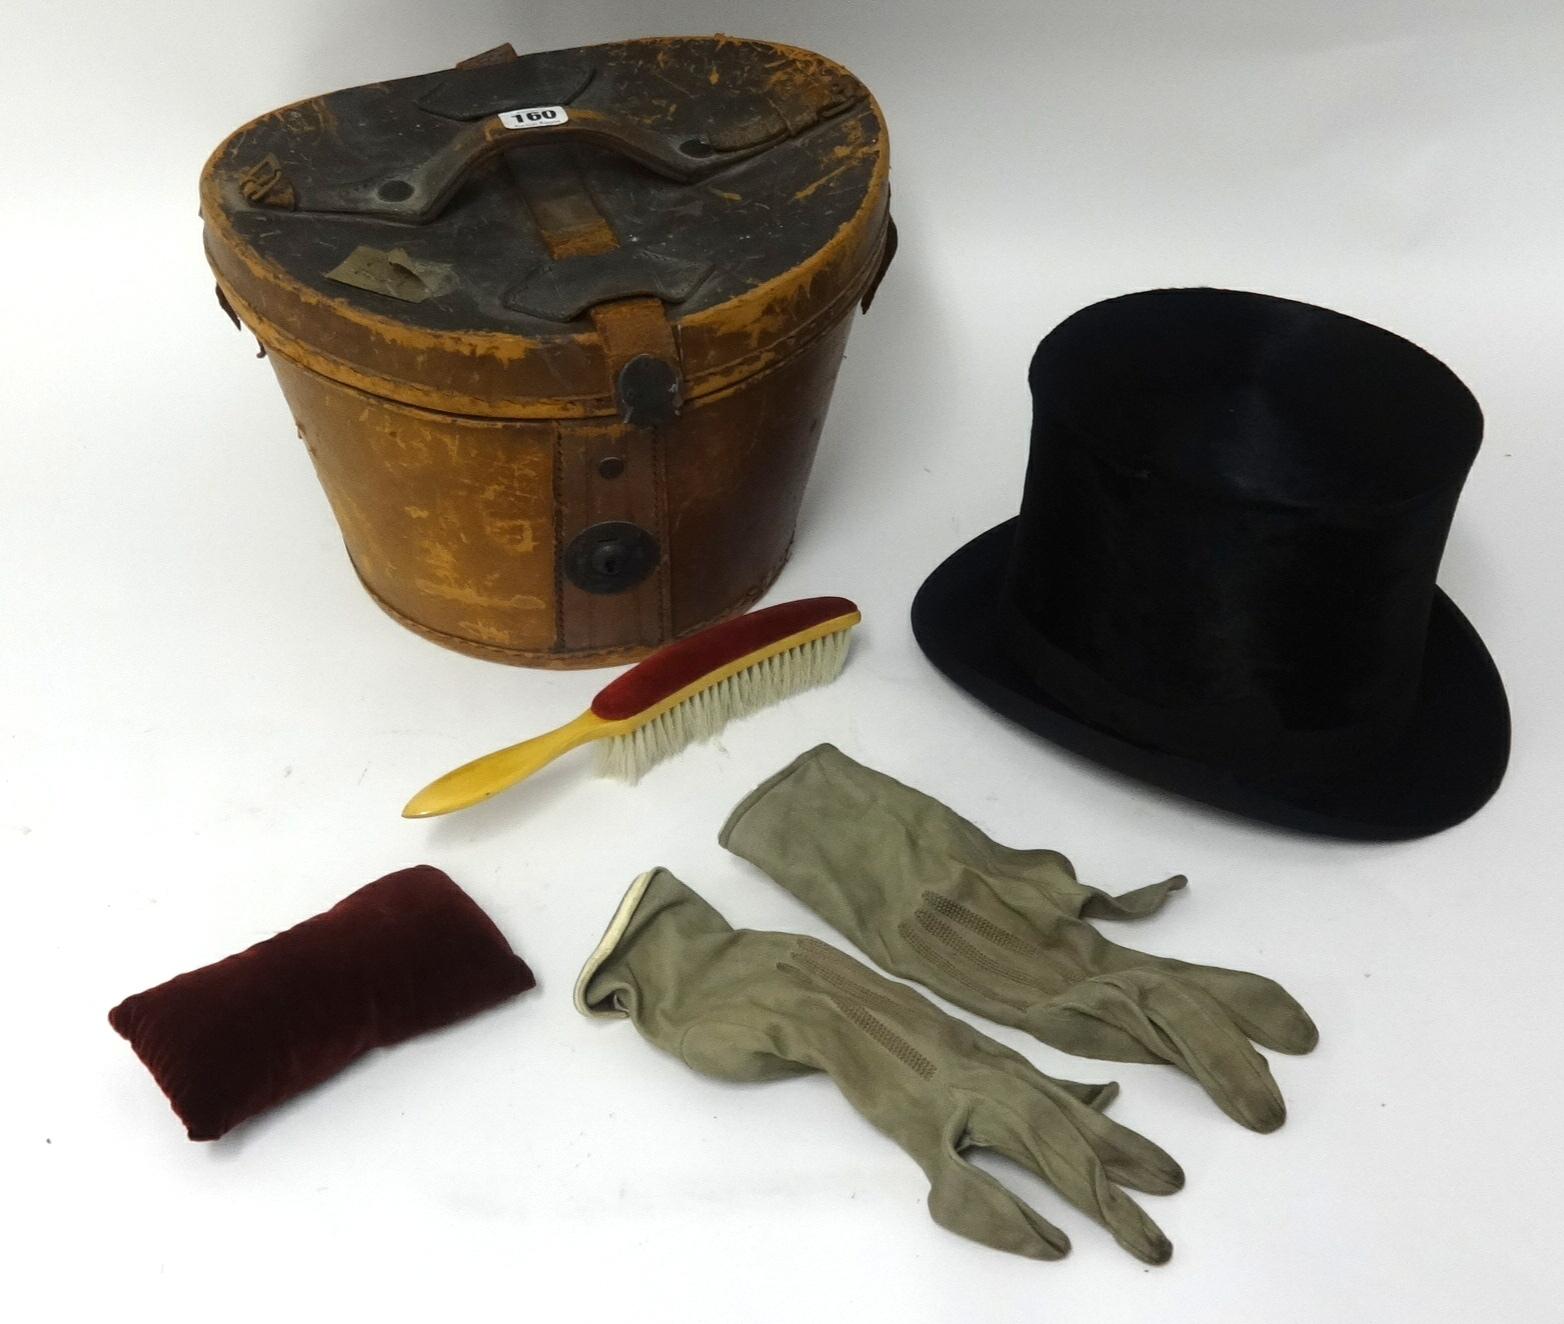 A Woodrow & Sons top hat with orginal box, gloves and brush - Image 2 of 2